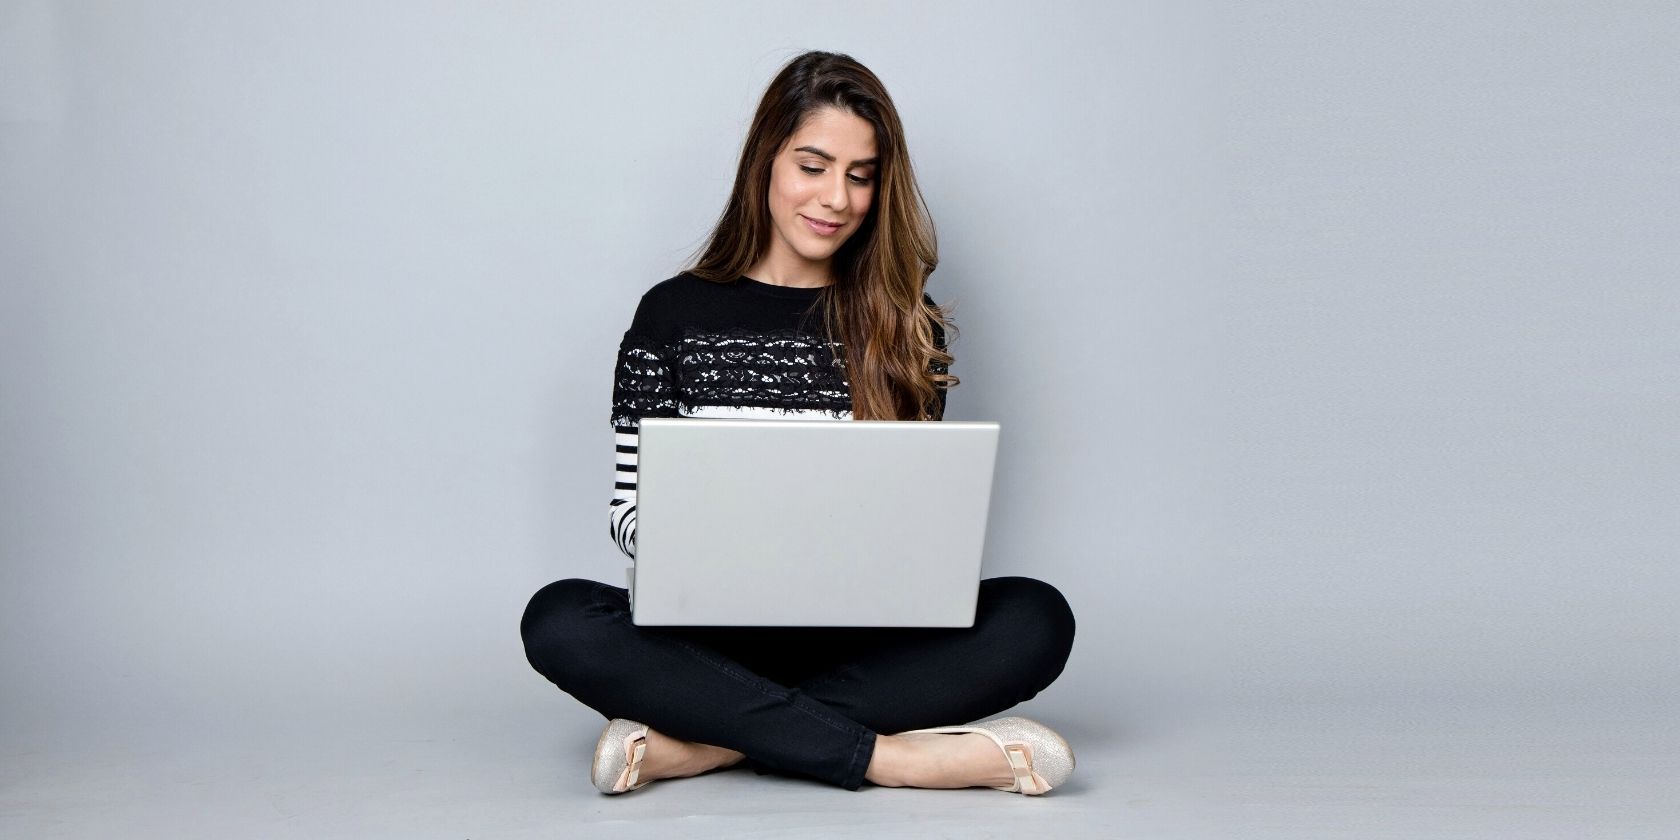 A girl typing on a laptop while leaning on a wall